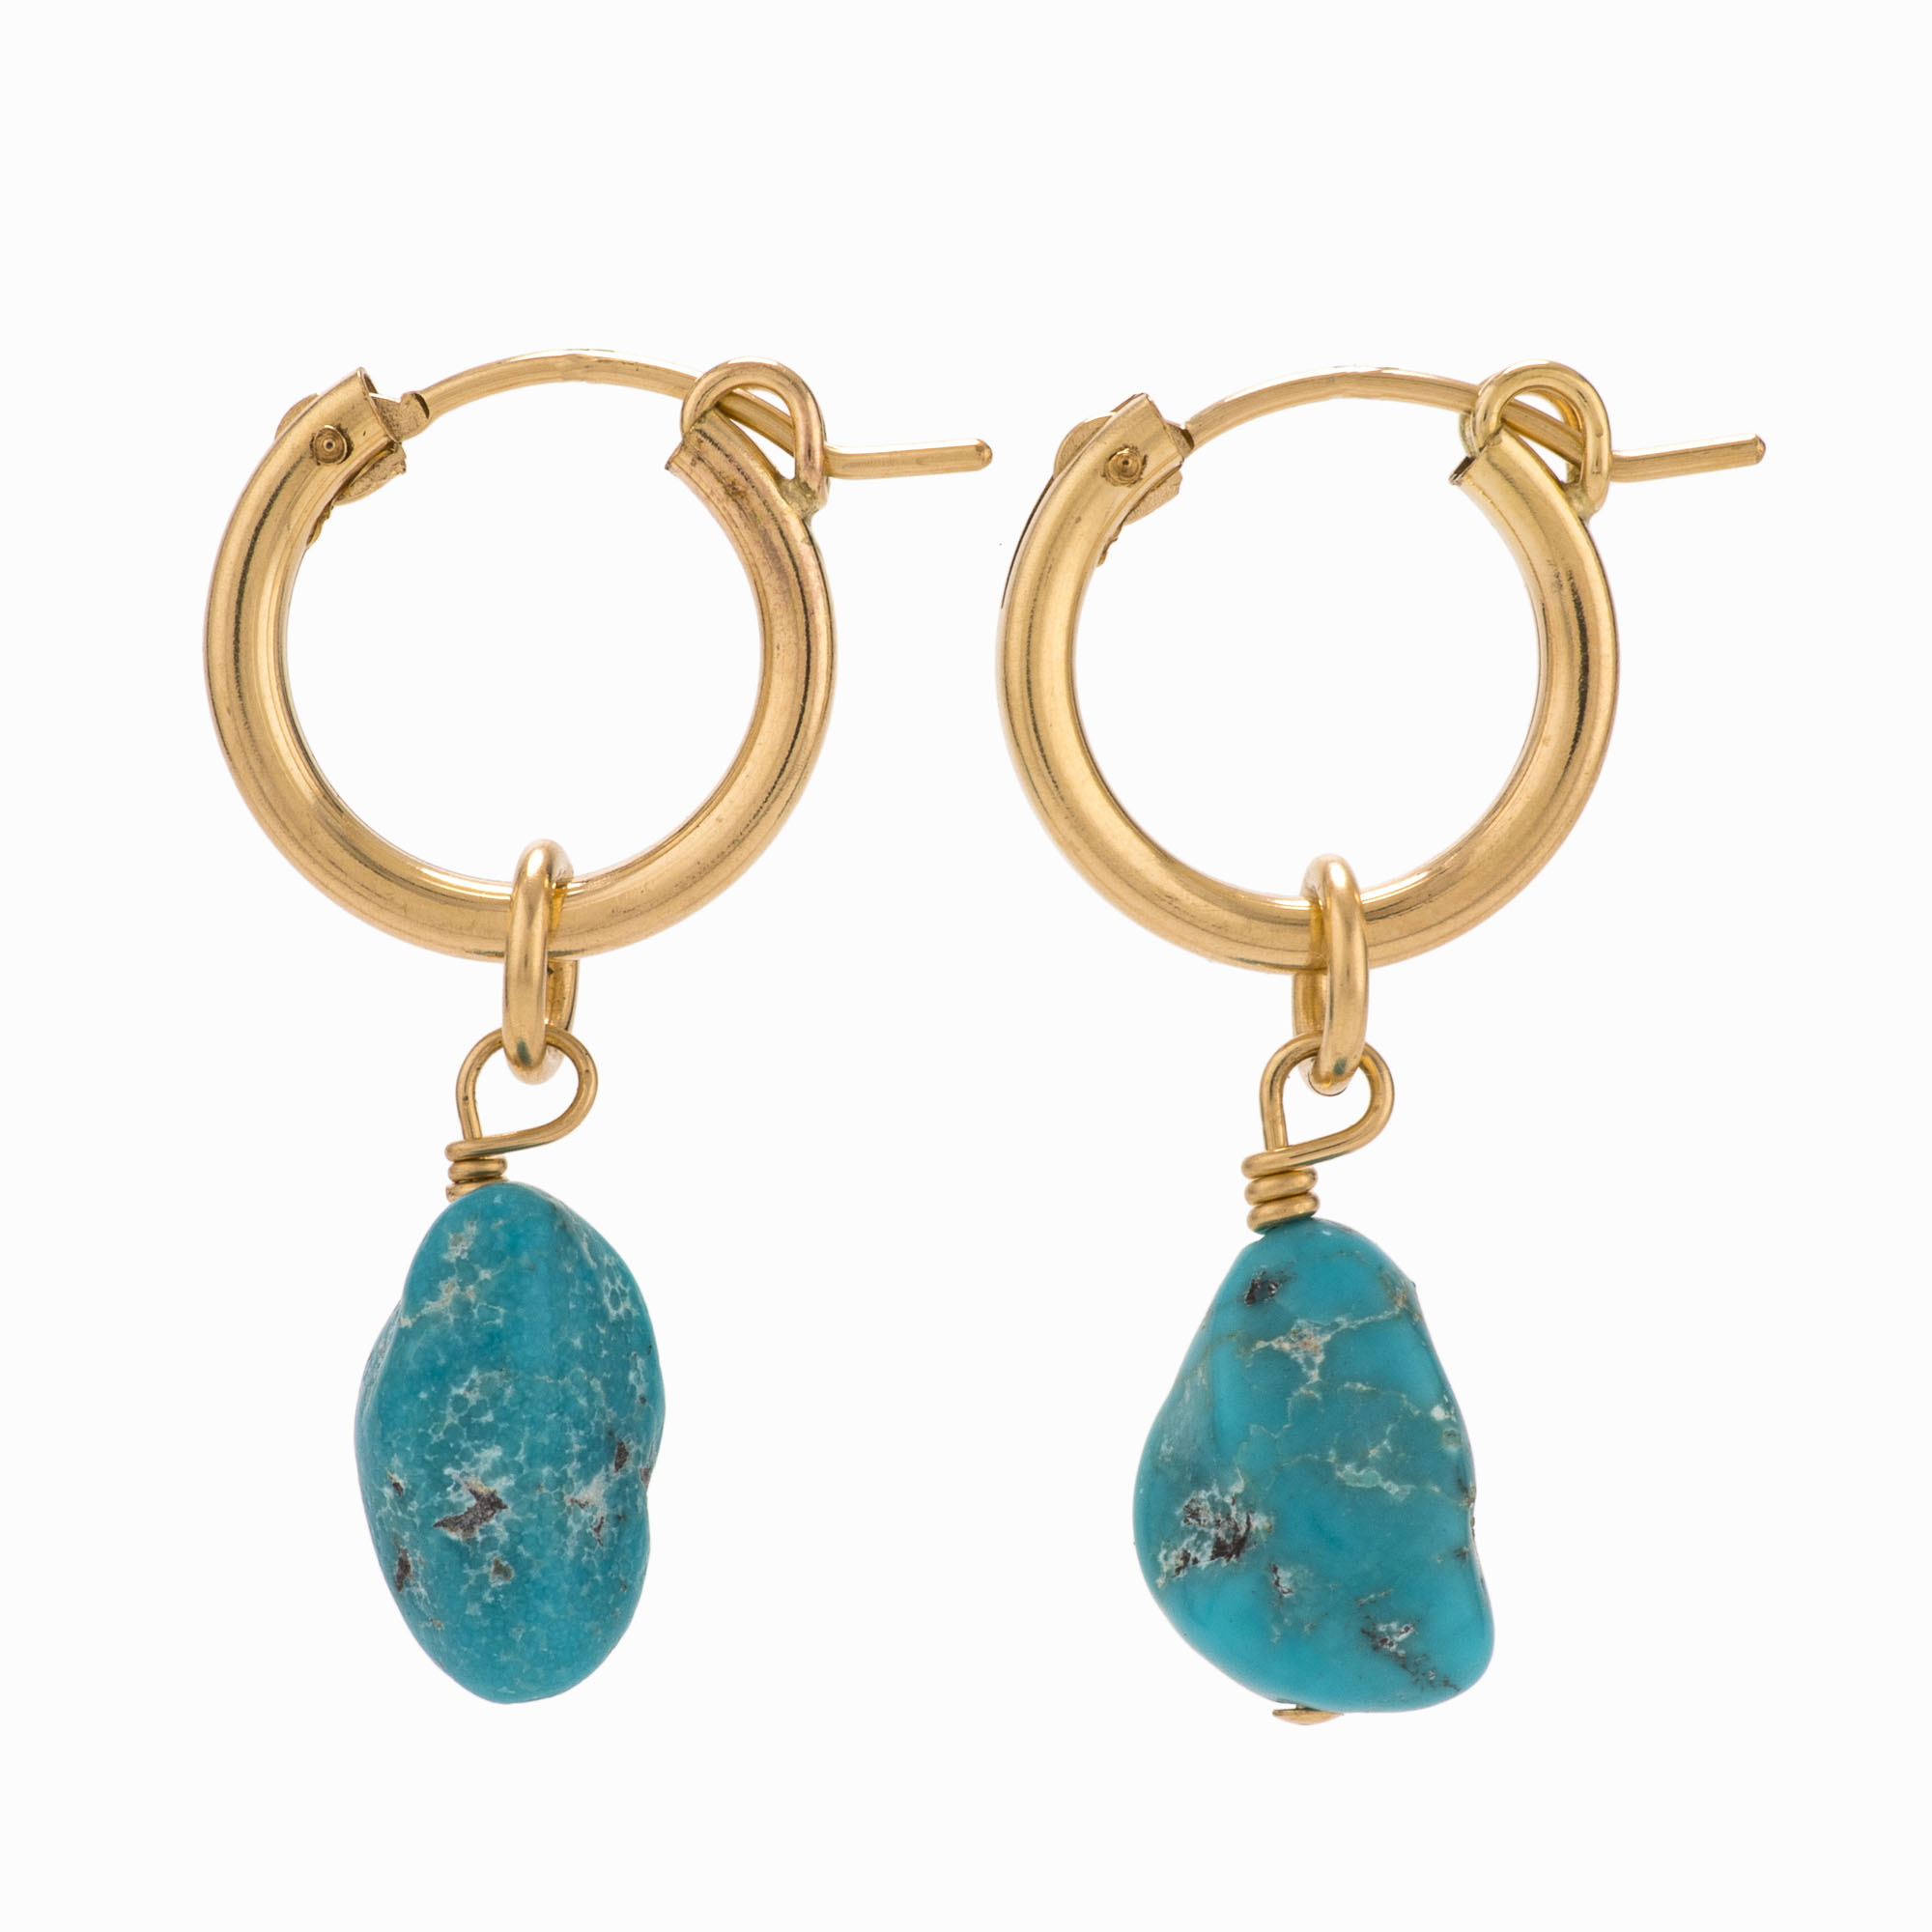 Featured image for “Bayer Turquoise Hoop Earrings”